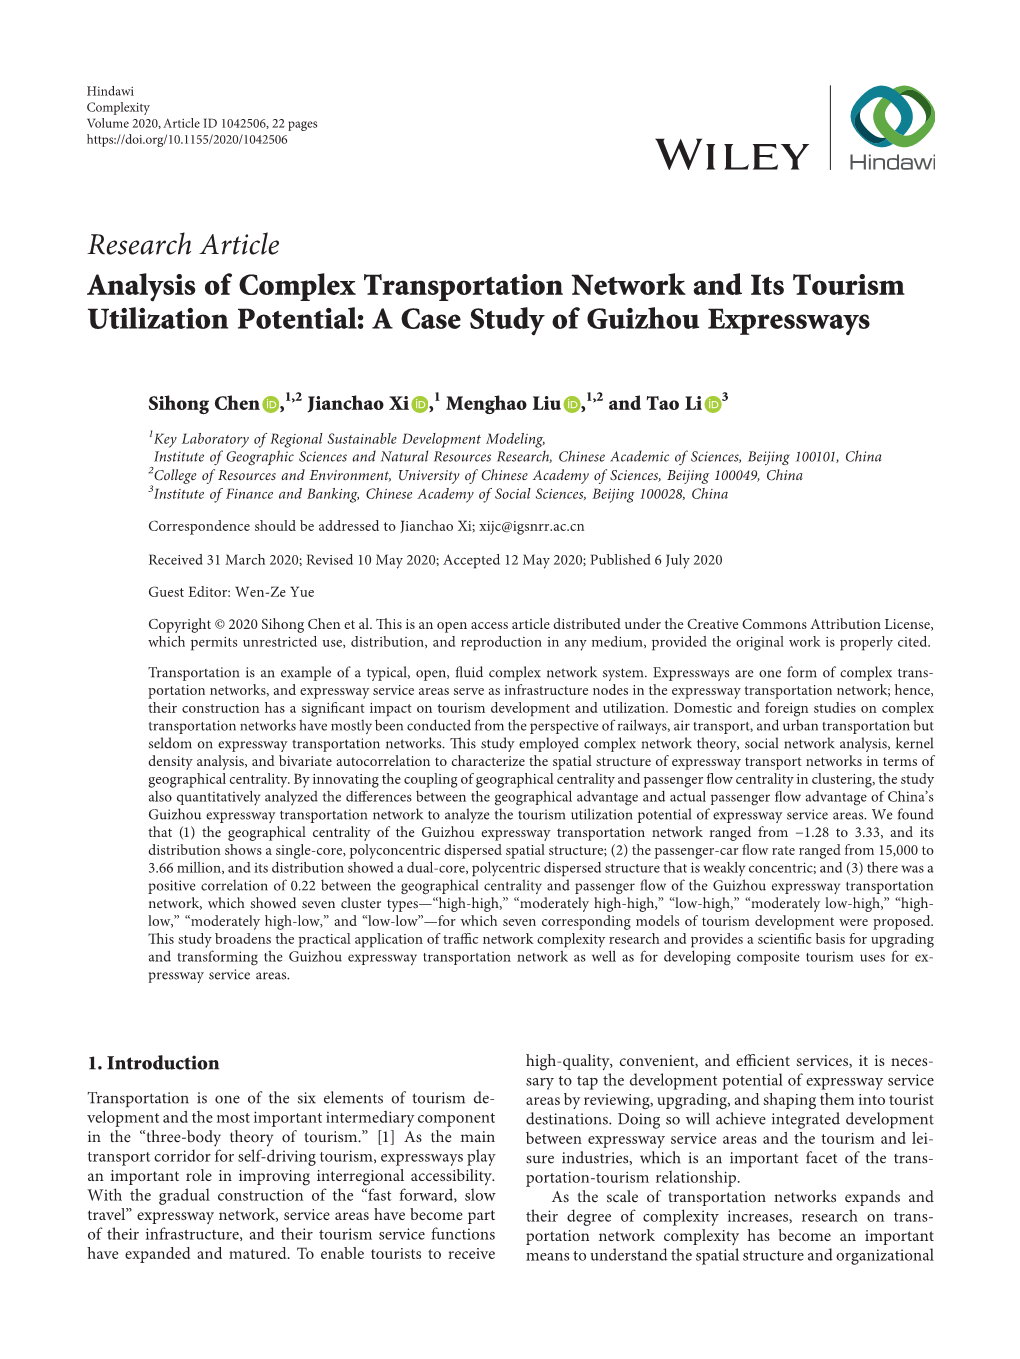 Analysis of Complex Transportation Network and Its Tourism Utilization Potential: a Case Study of Guizhou Expressways